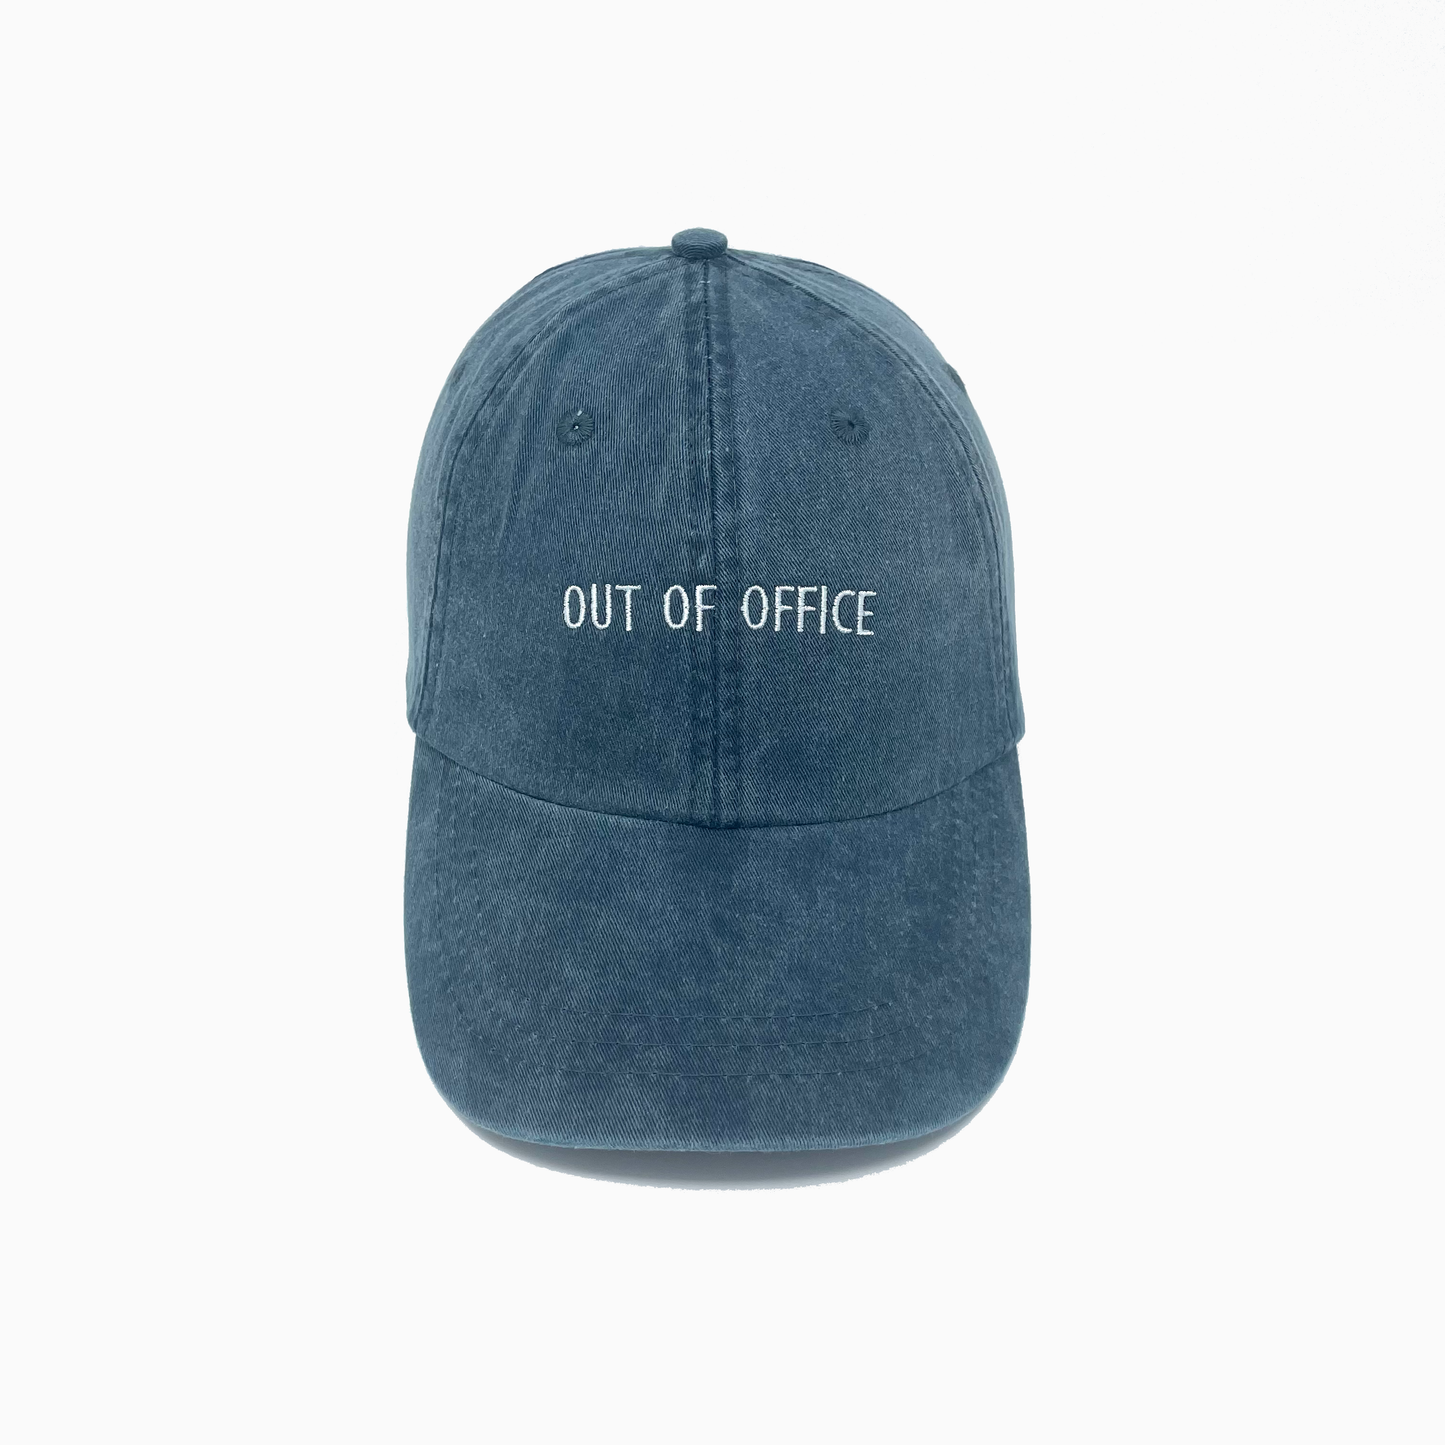 Out of Office Embroidered Pigment-Dyed Baseball Cap (Block Condensed Font) - Adult Unisex